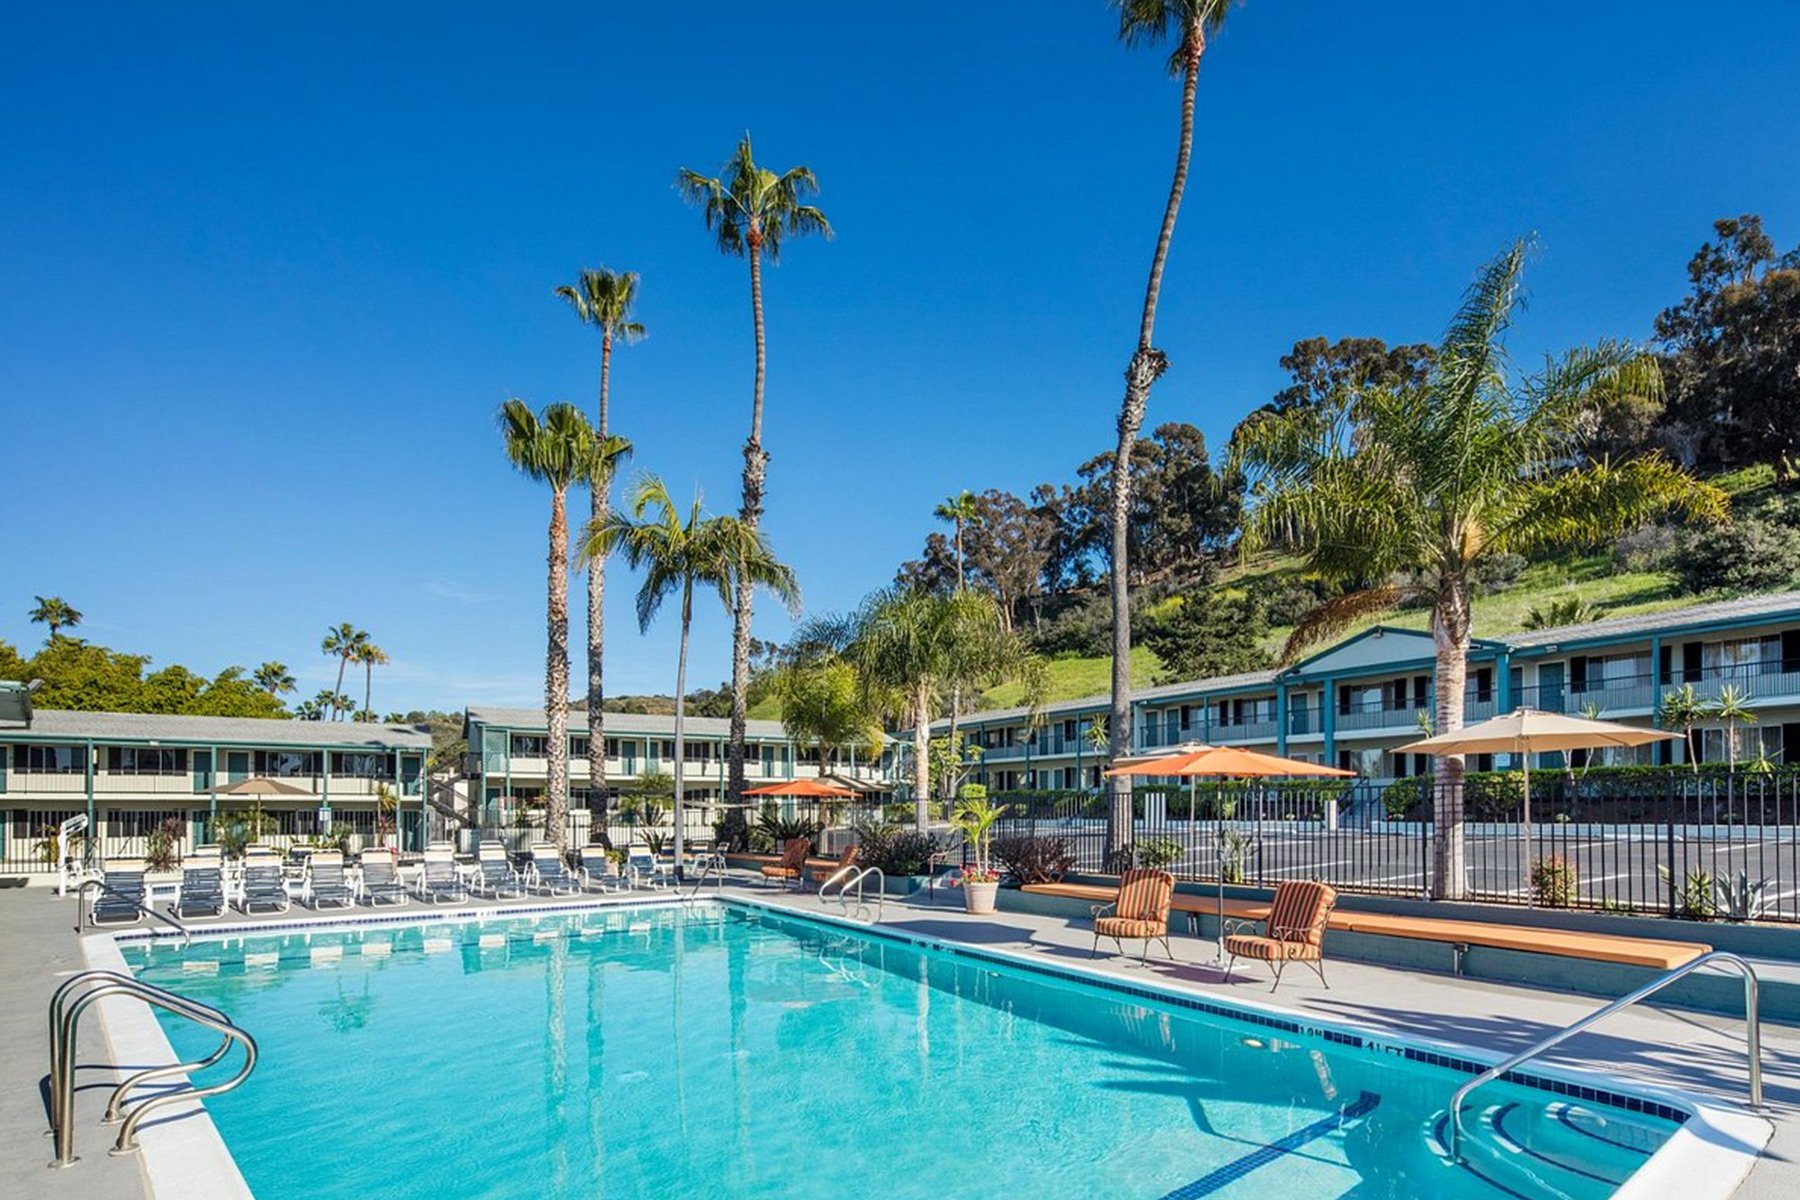 Hotels in San Diego Mission Valley CA